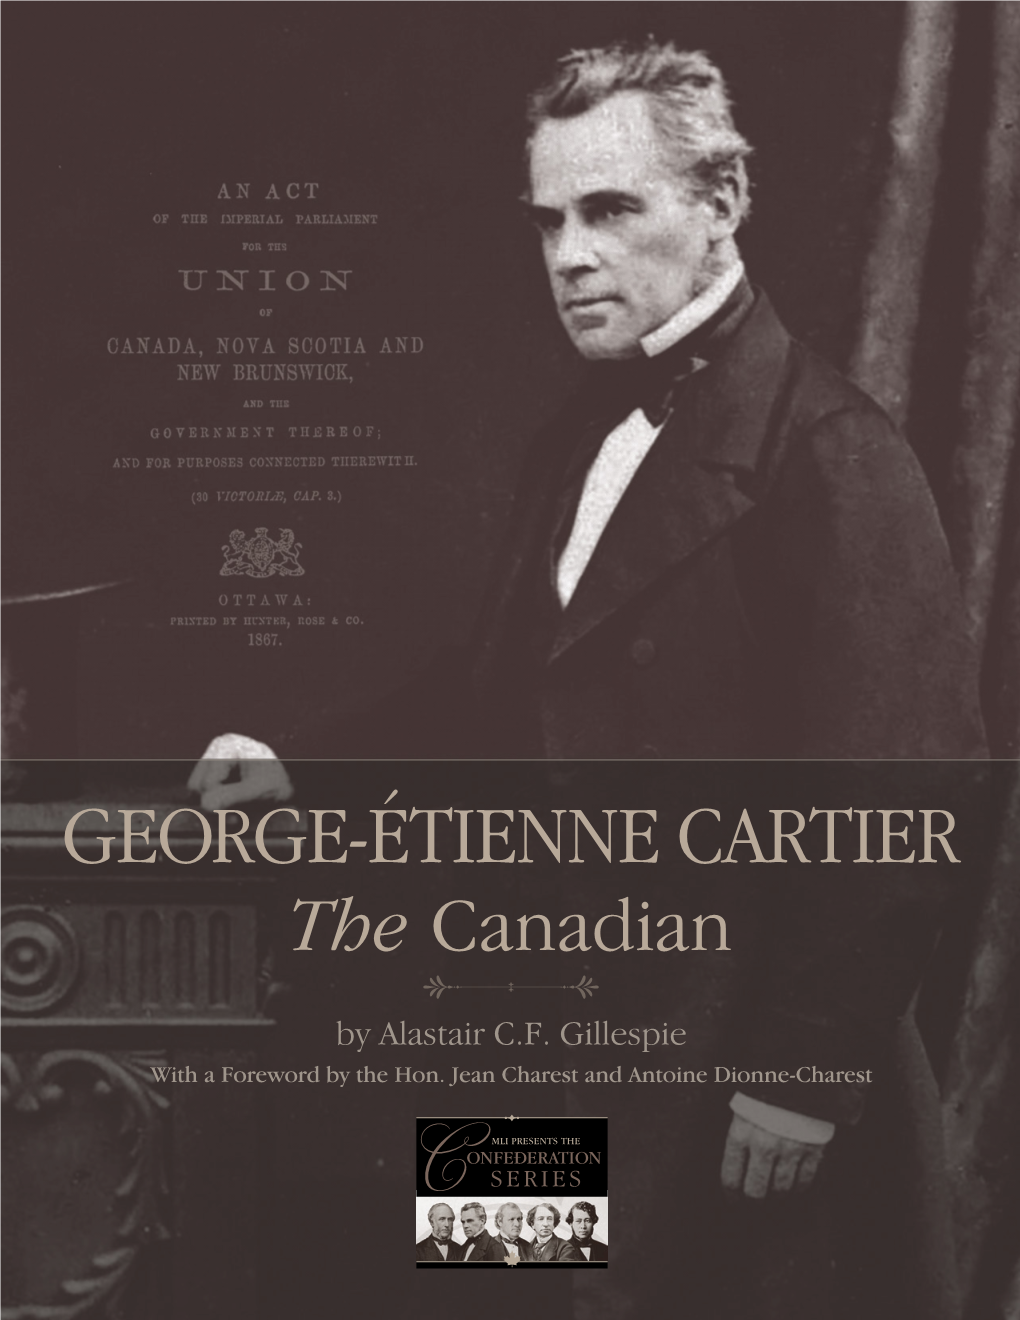 GEORGE-ÉTIENNE CARTIER the Canadian